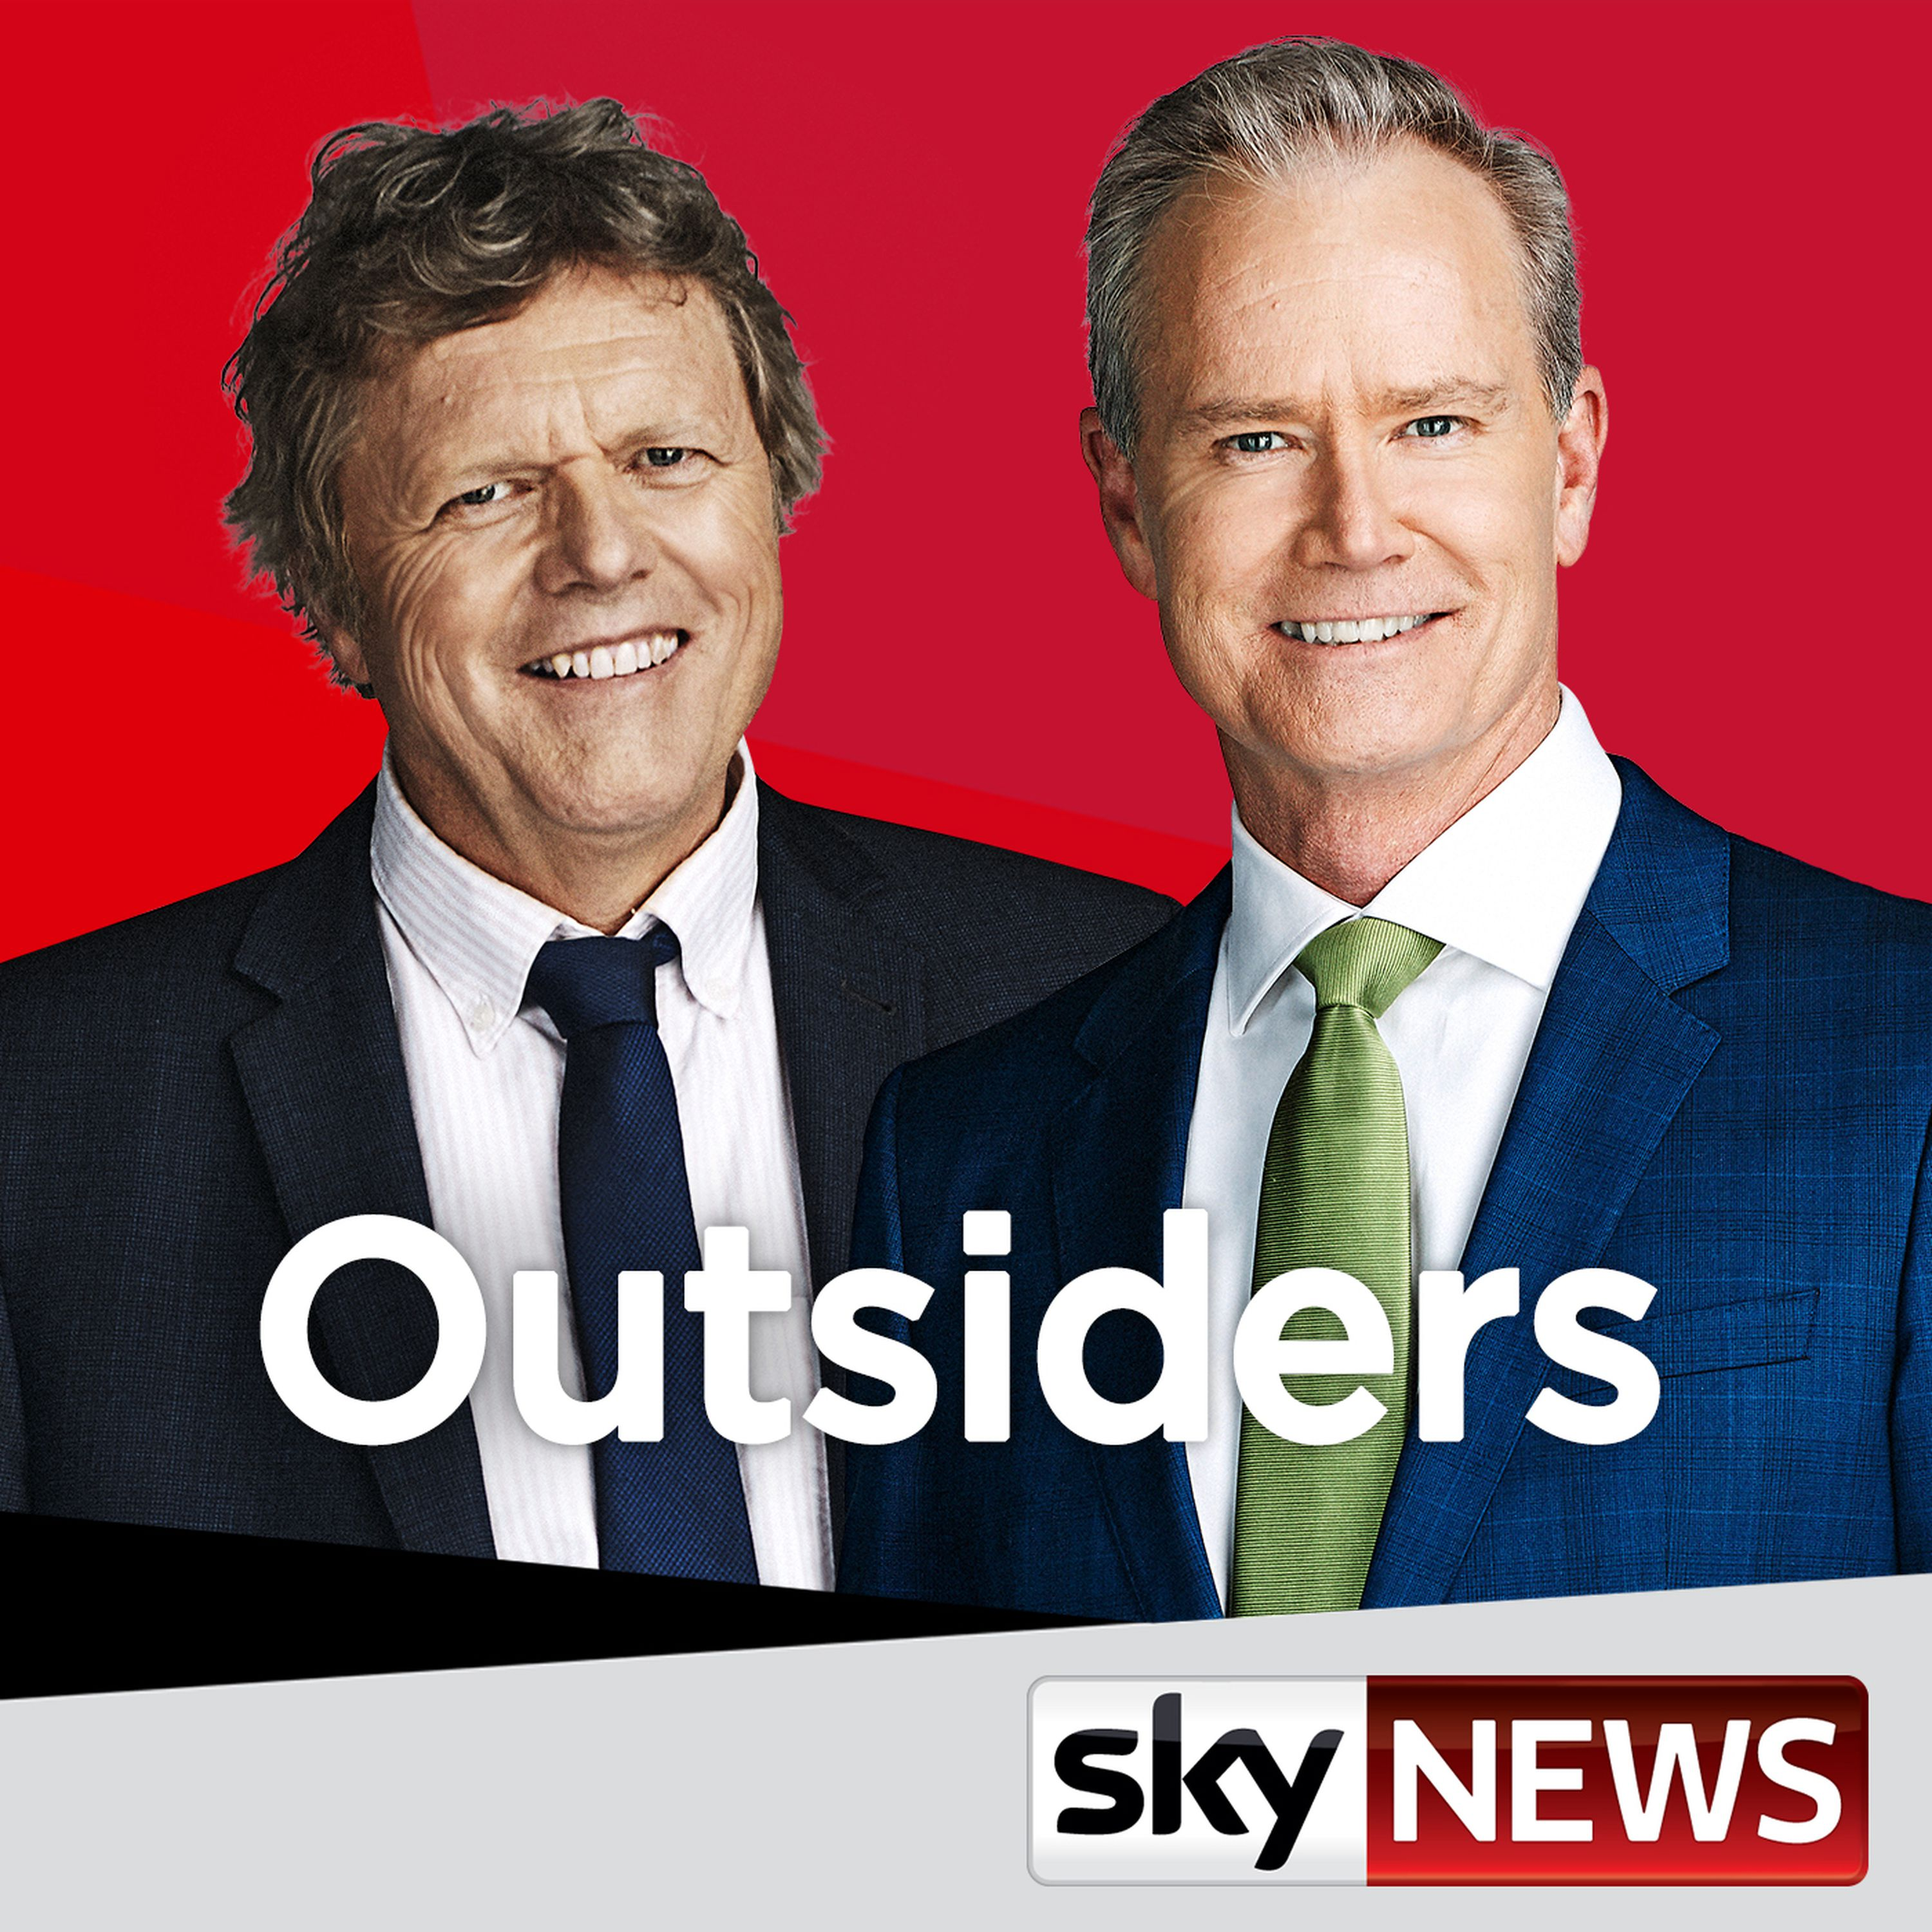 Outsiders, Sunday 21st October